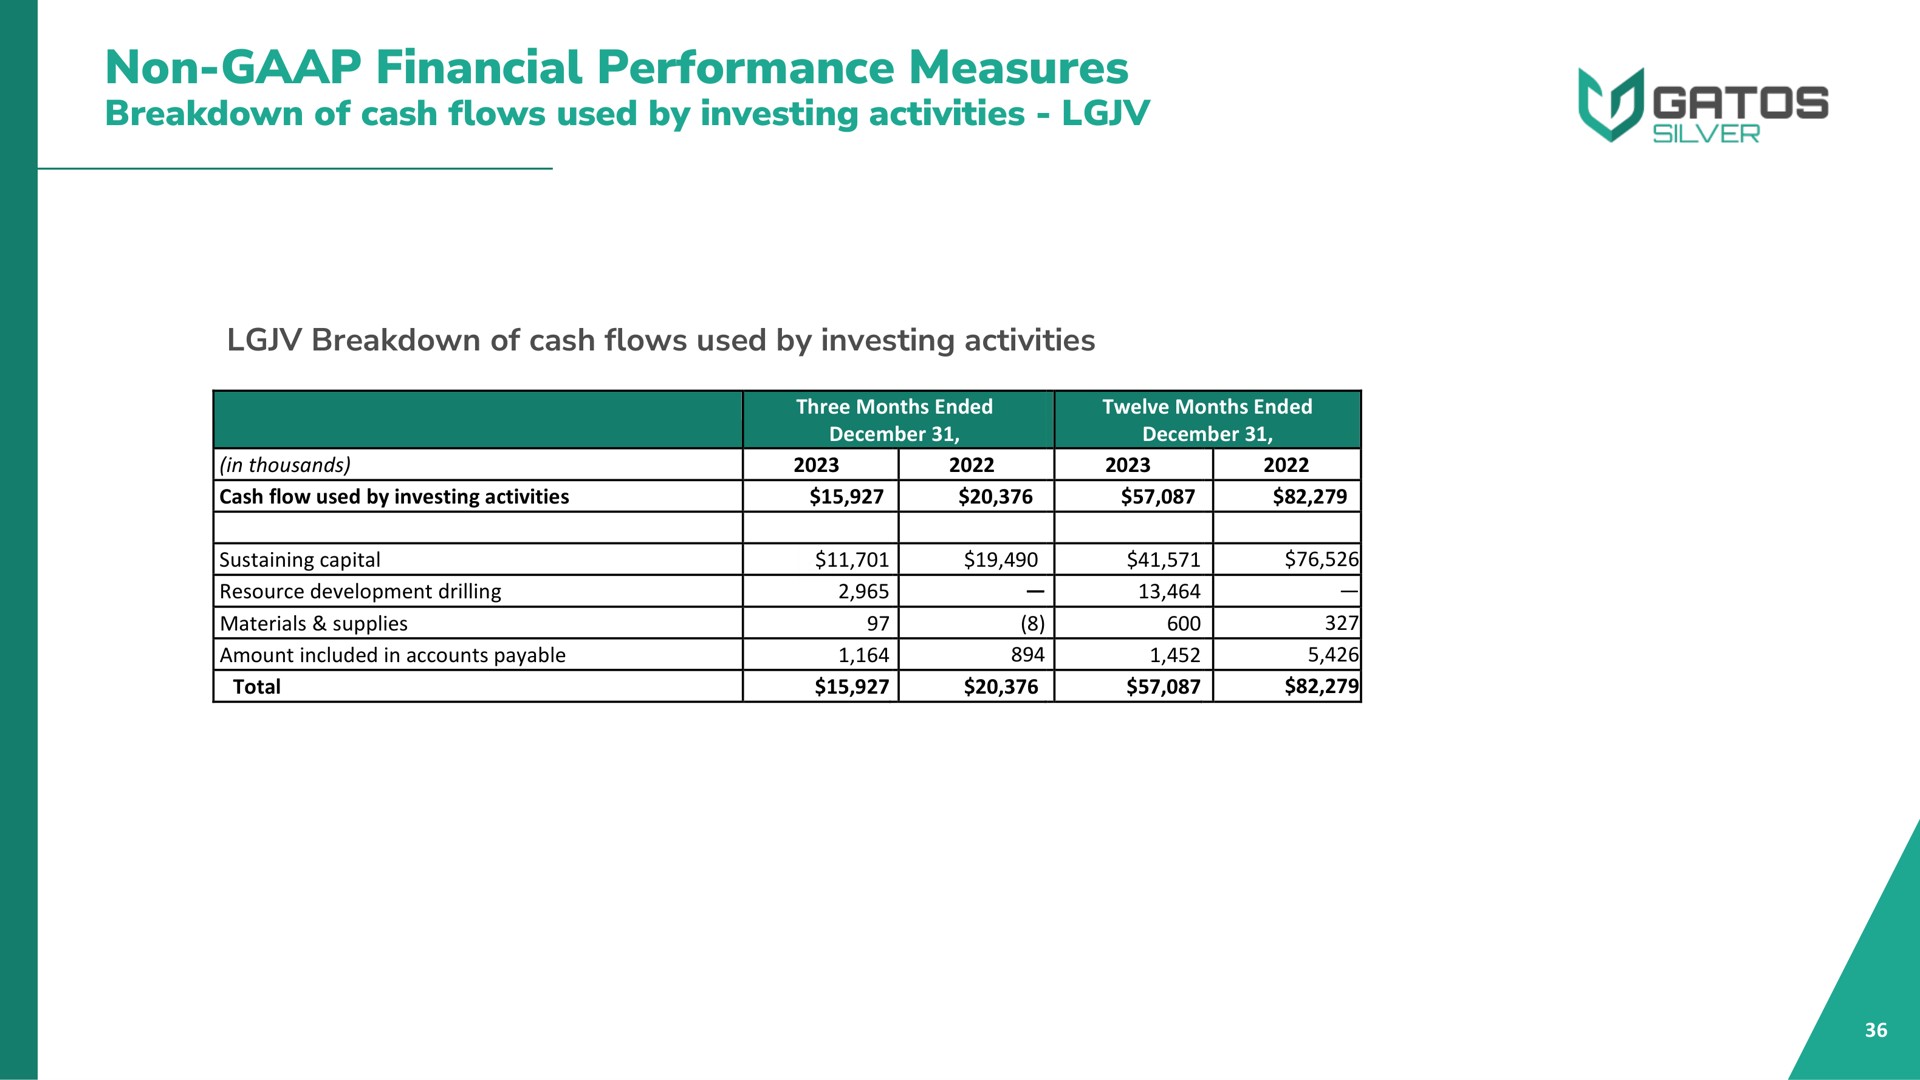 non financial performance measures breakdown of cash flows used by investing activities materials supplies | Gatos Silver